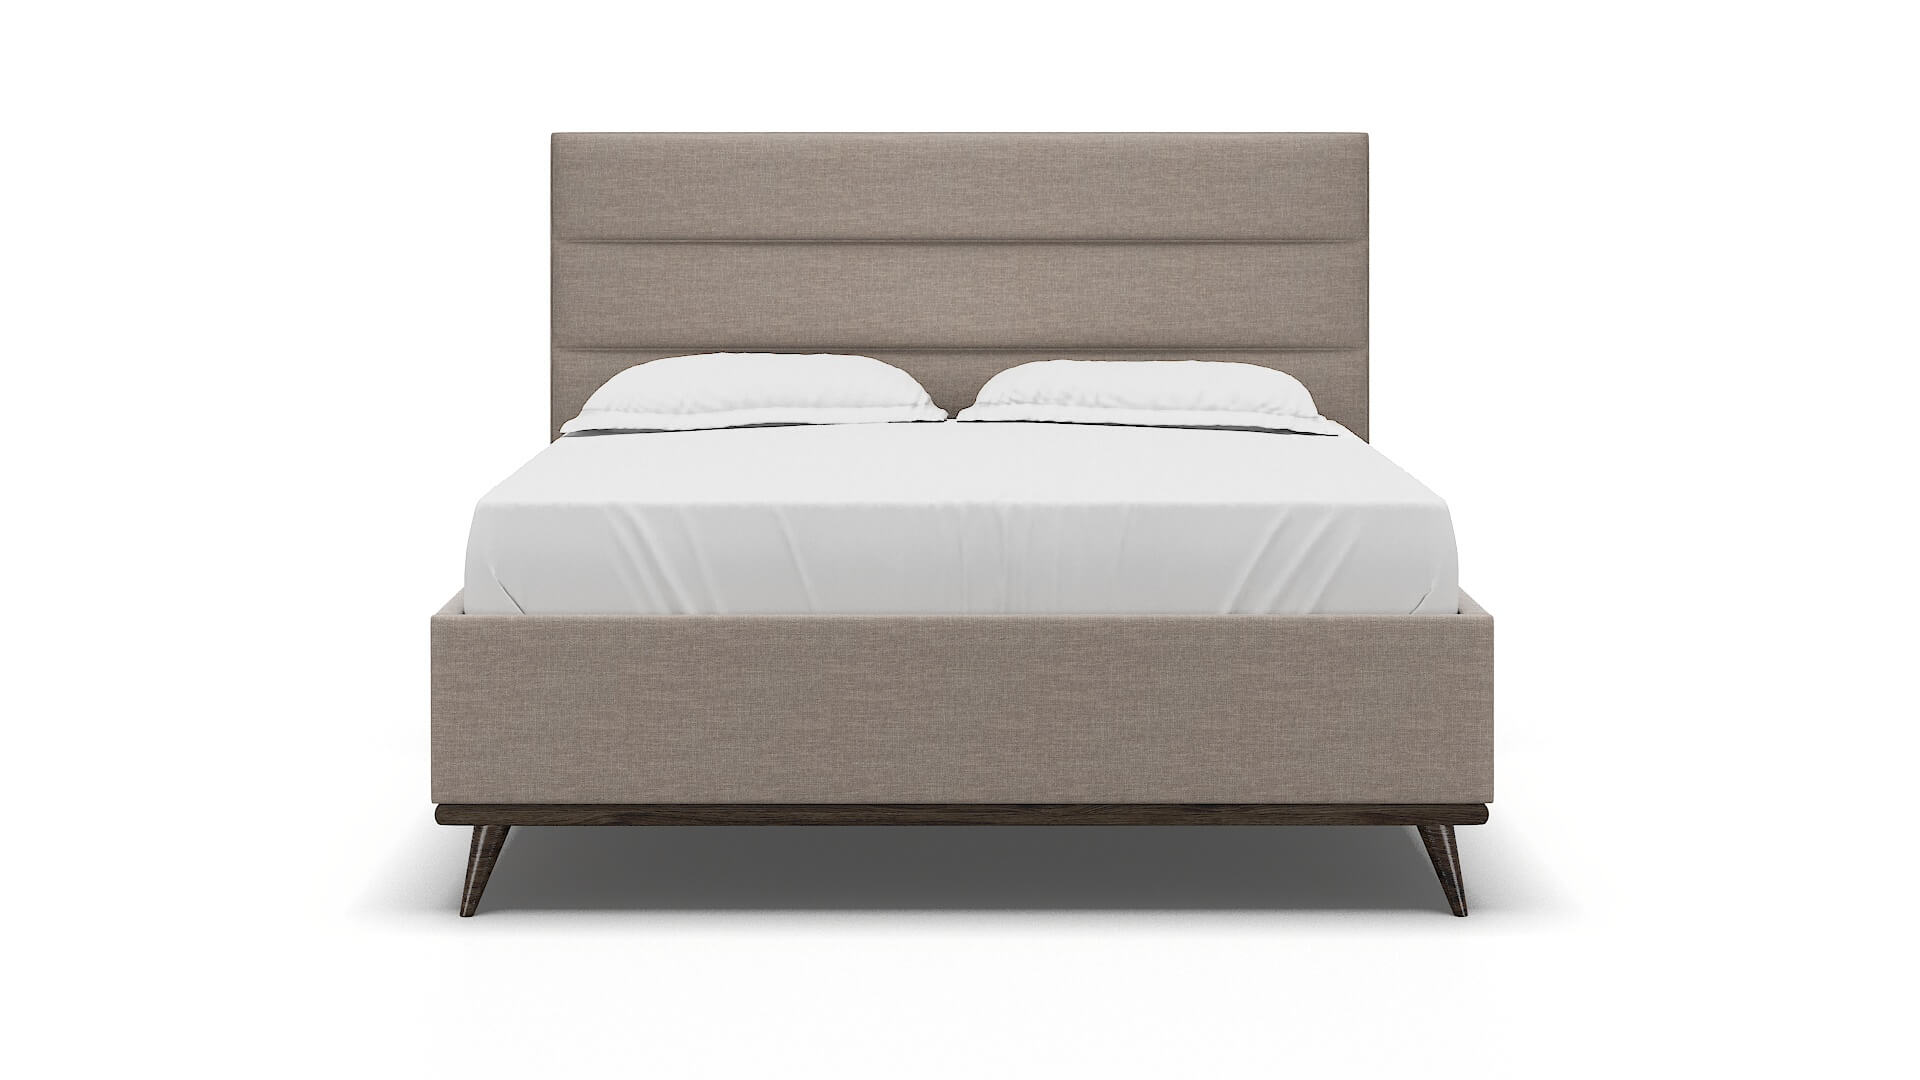 Hannela Clyde Dolphin Bed King espresso legs 1